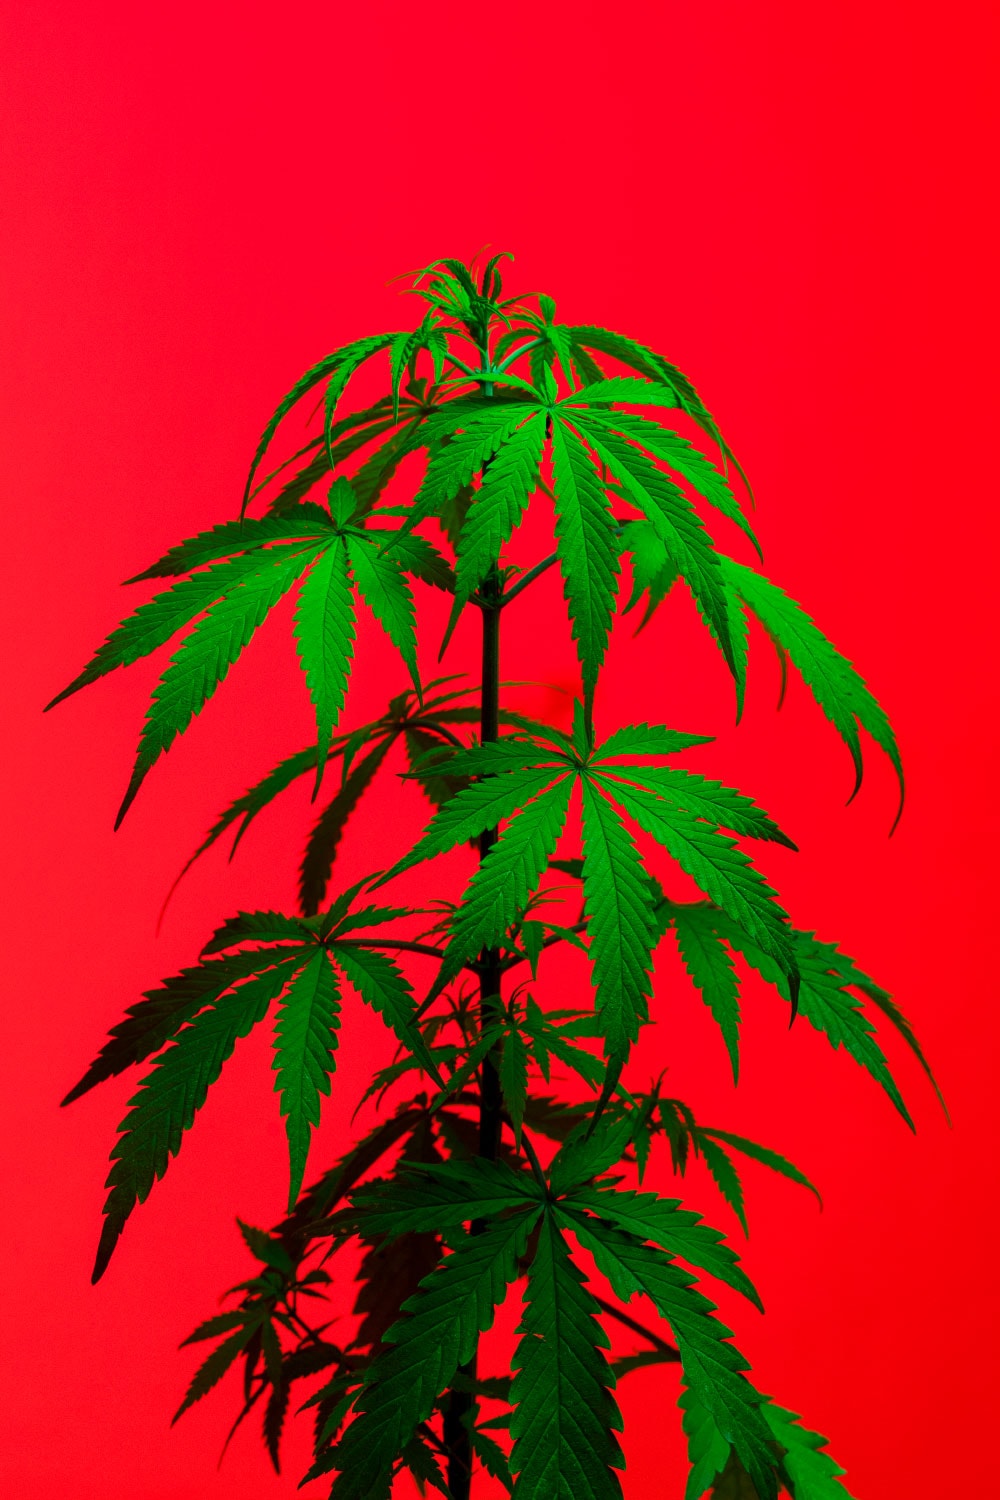 Marijuana Plant Against A Red Background.